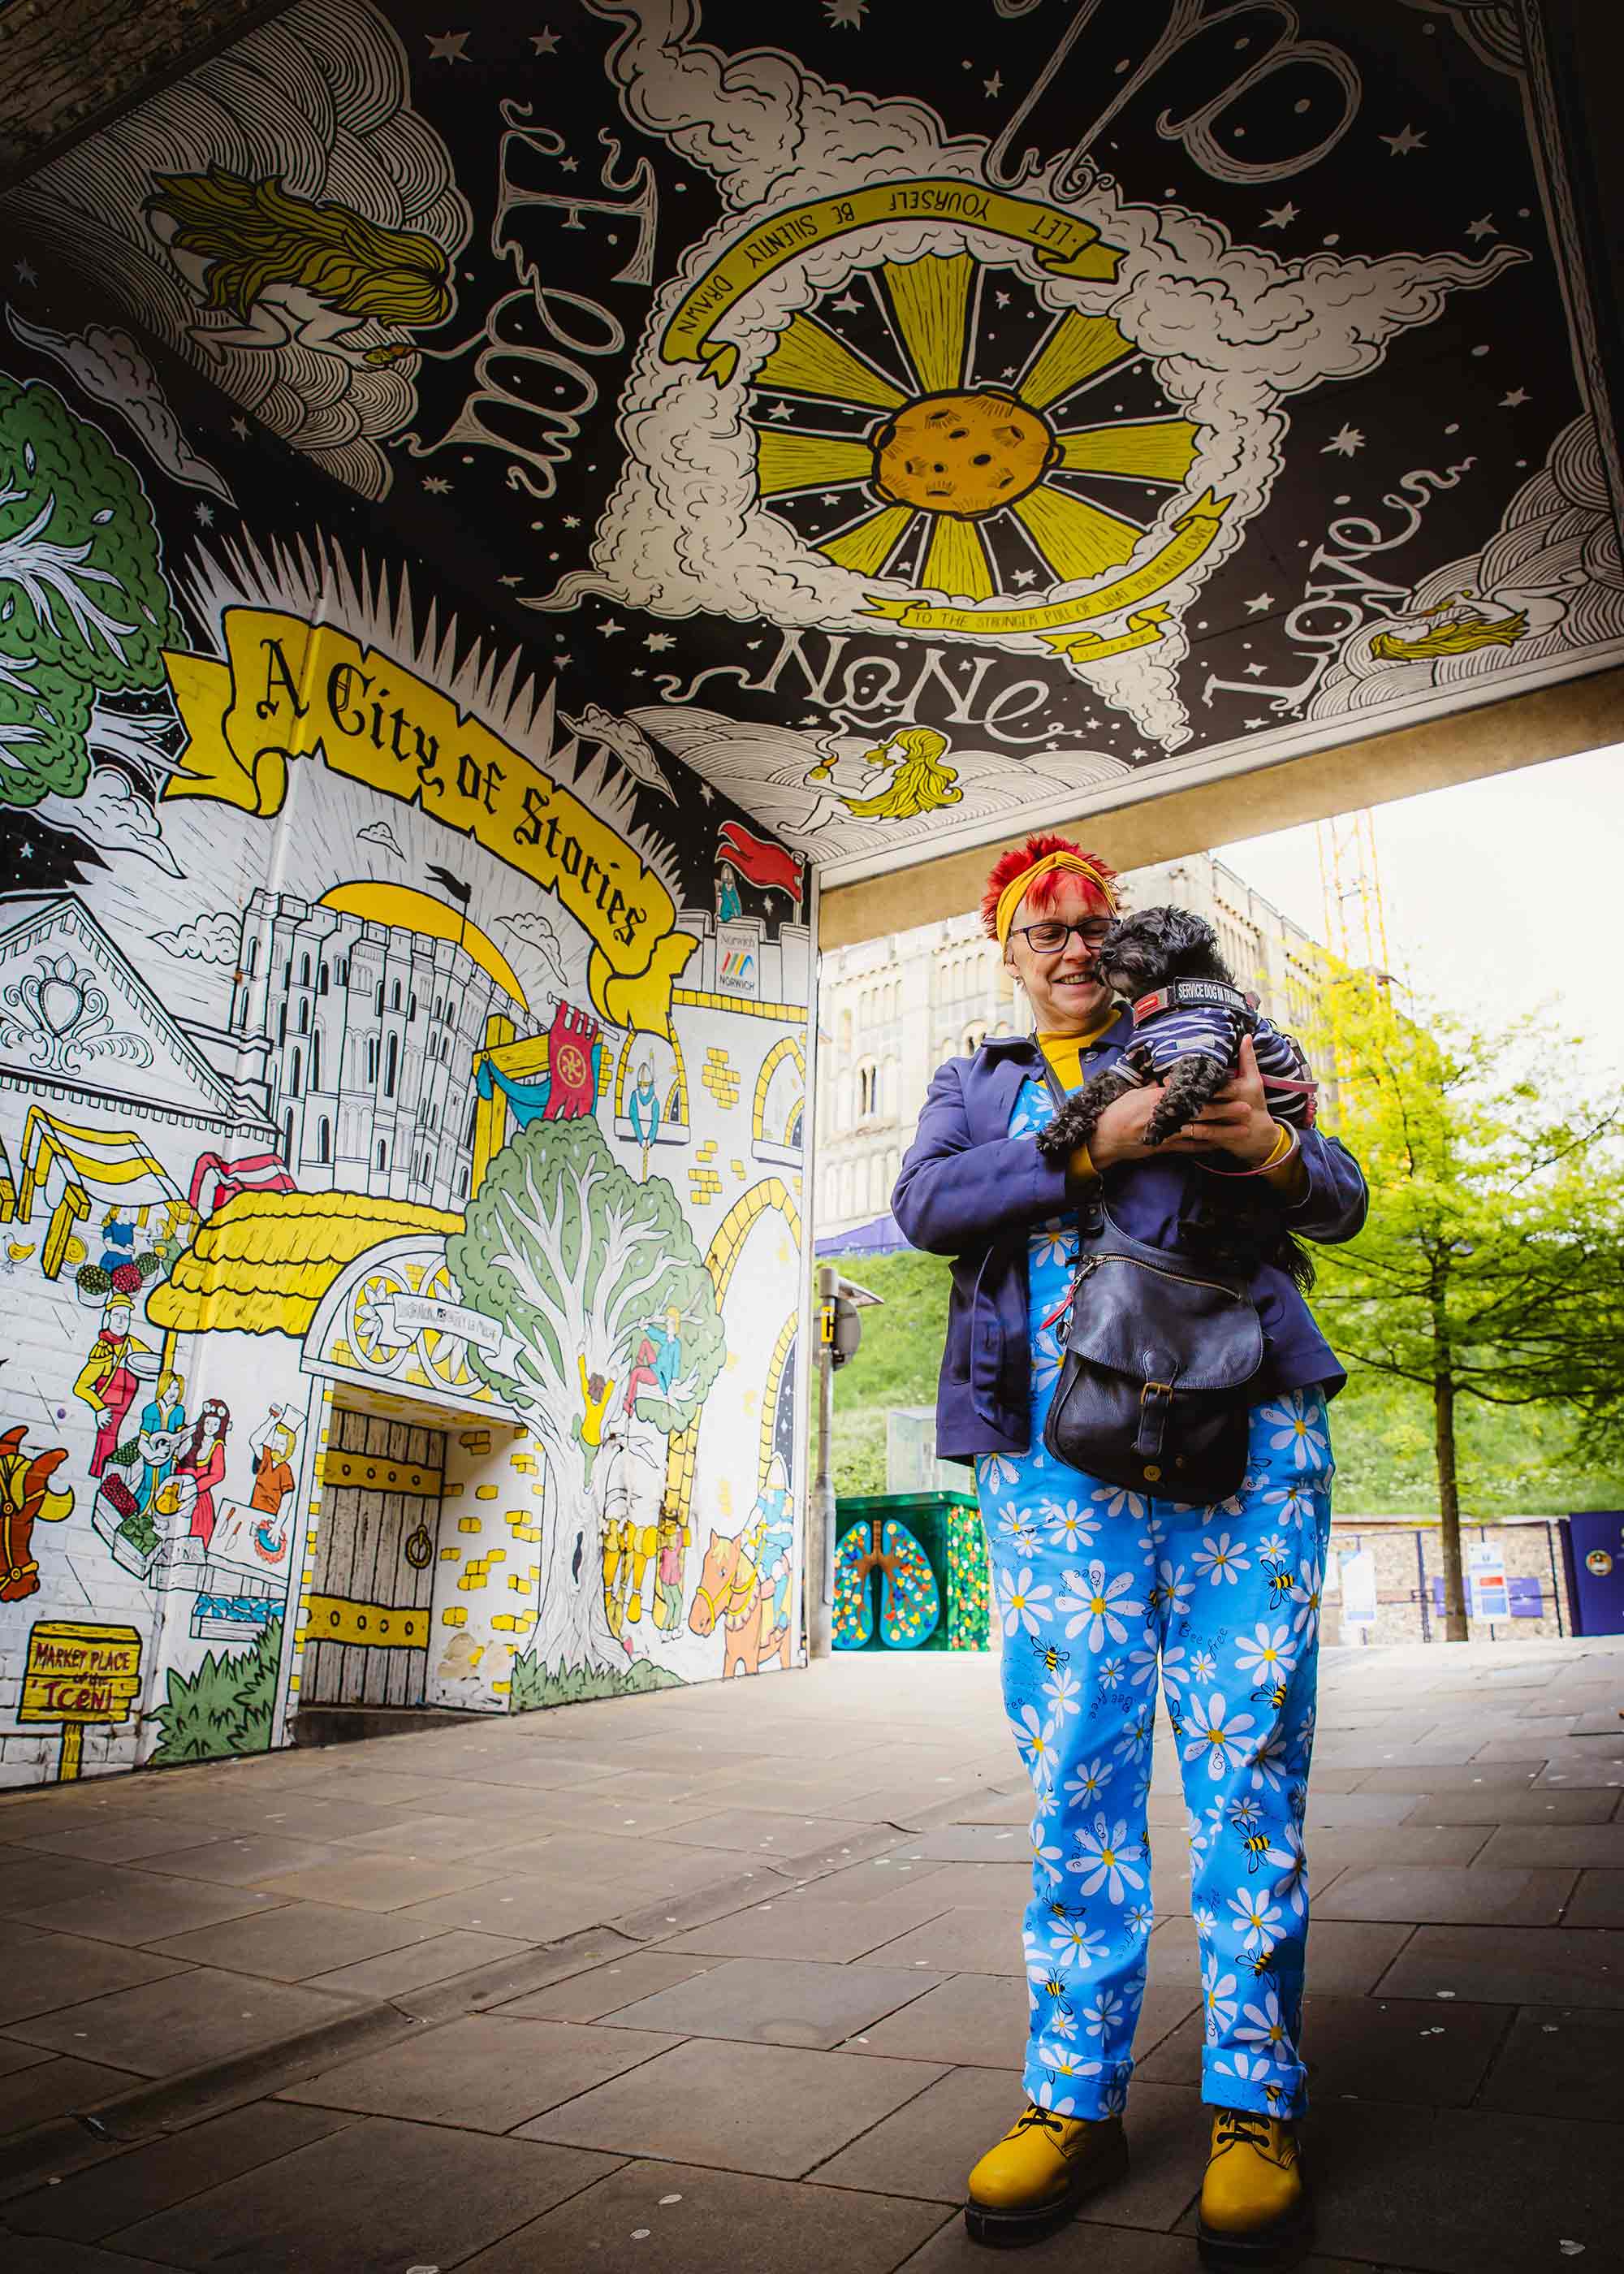 A woman holding a small dog standing under an archway which is covered with images which have been painted on it.